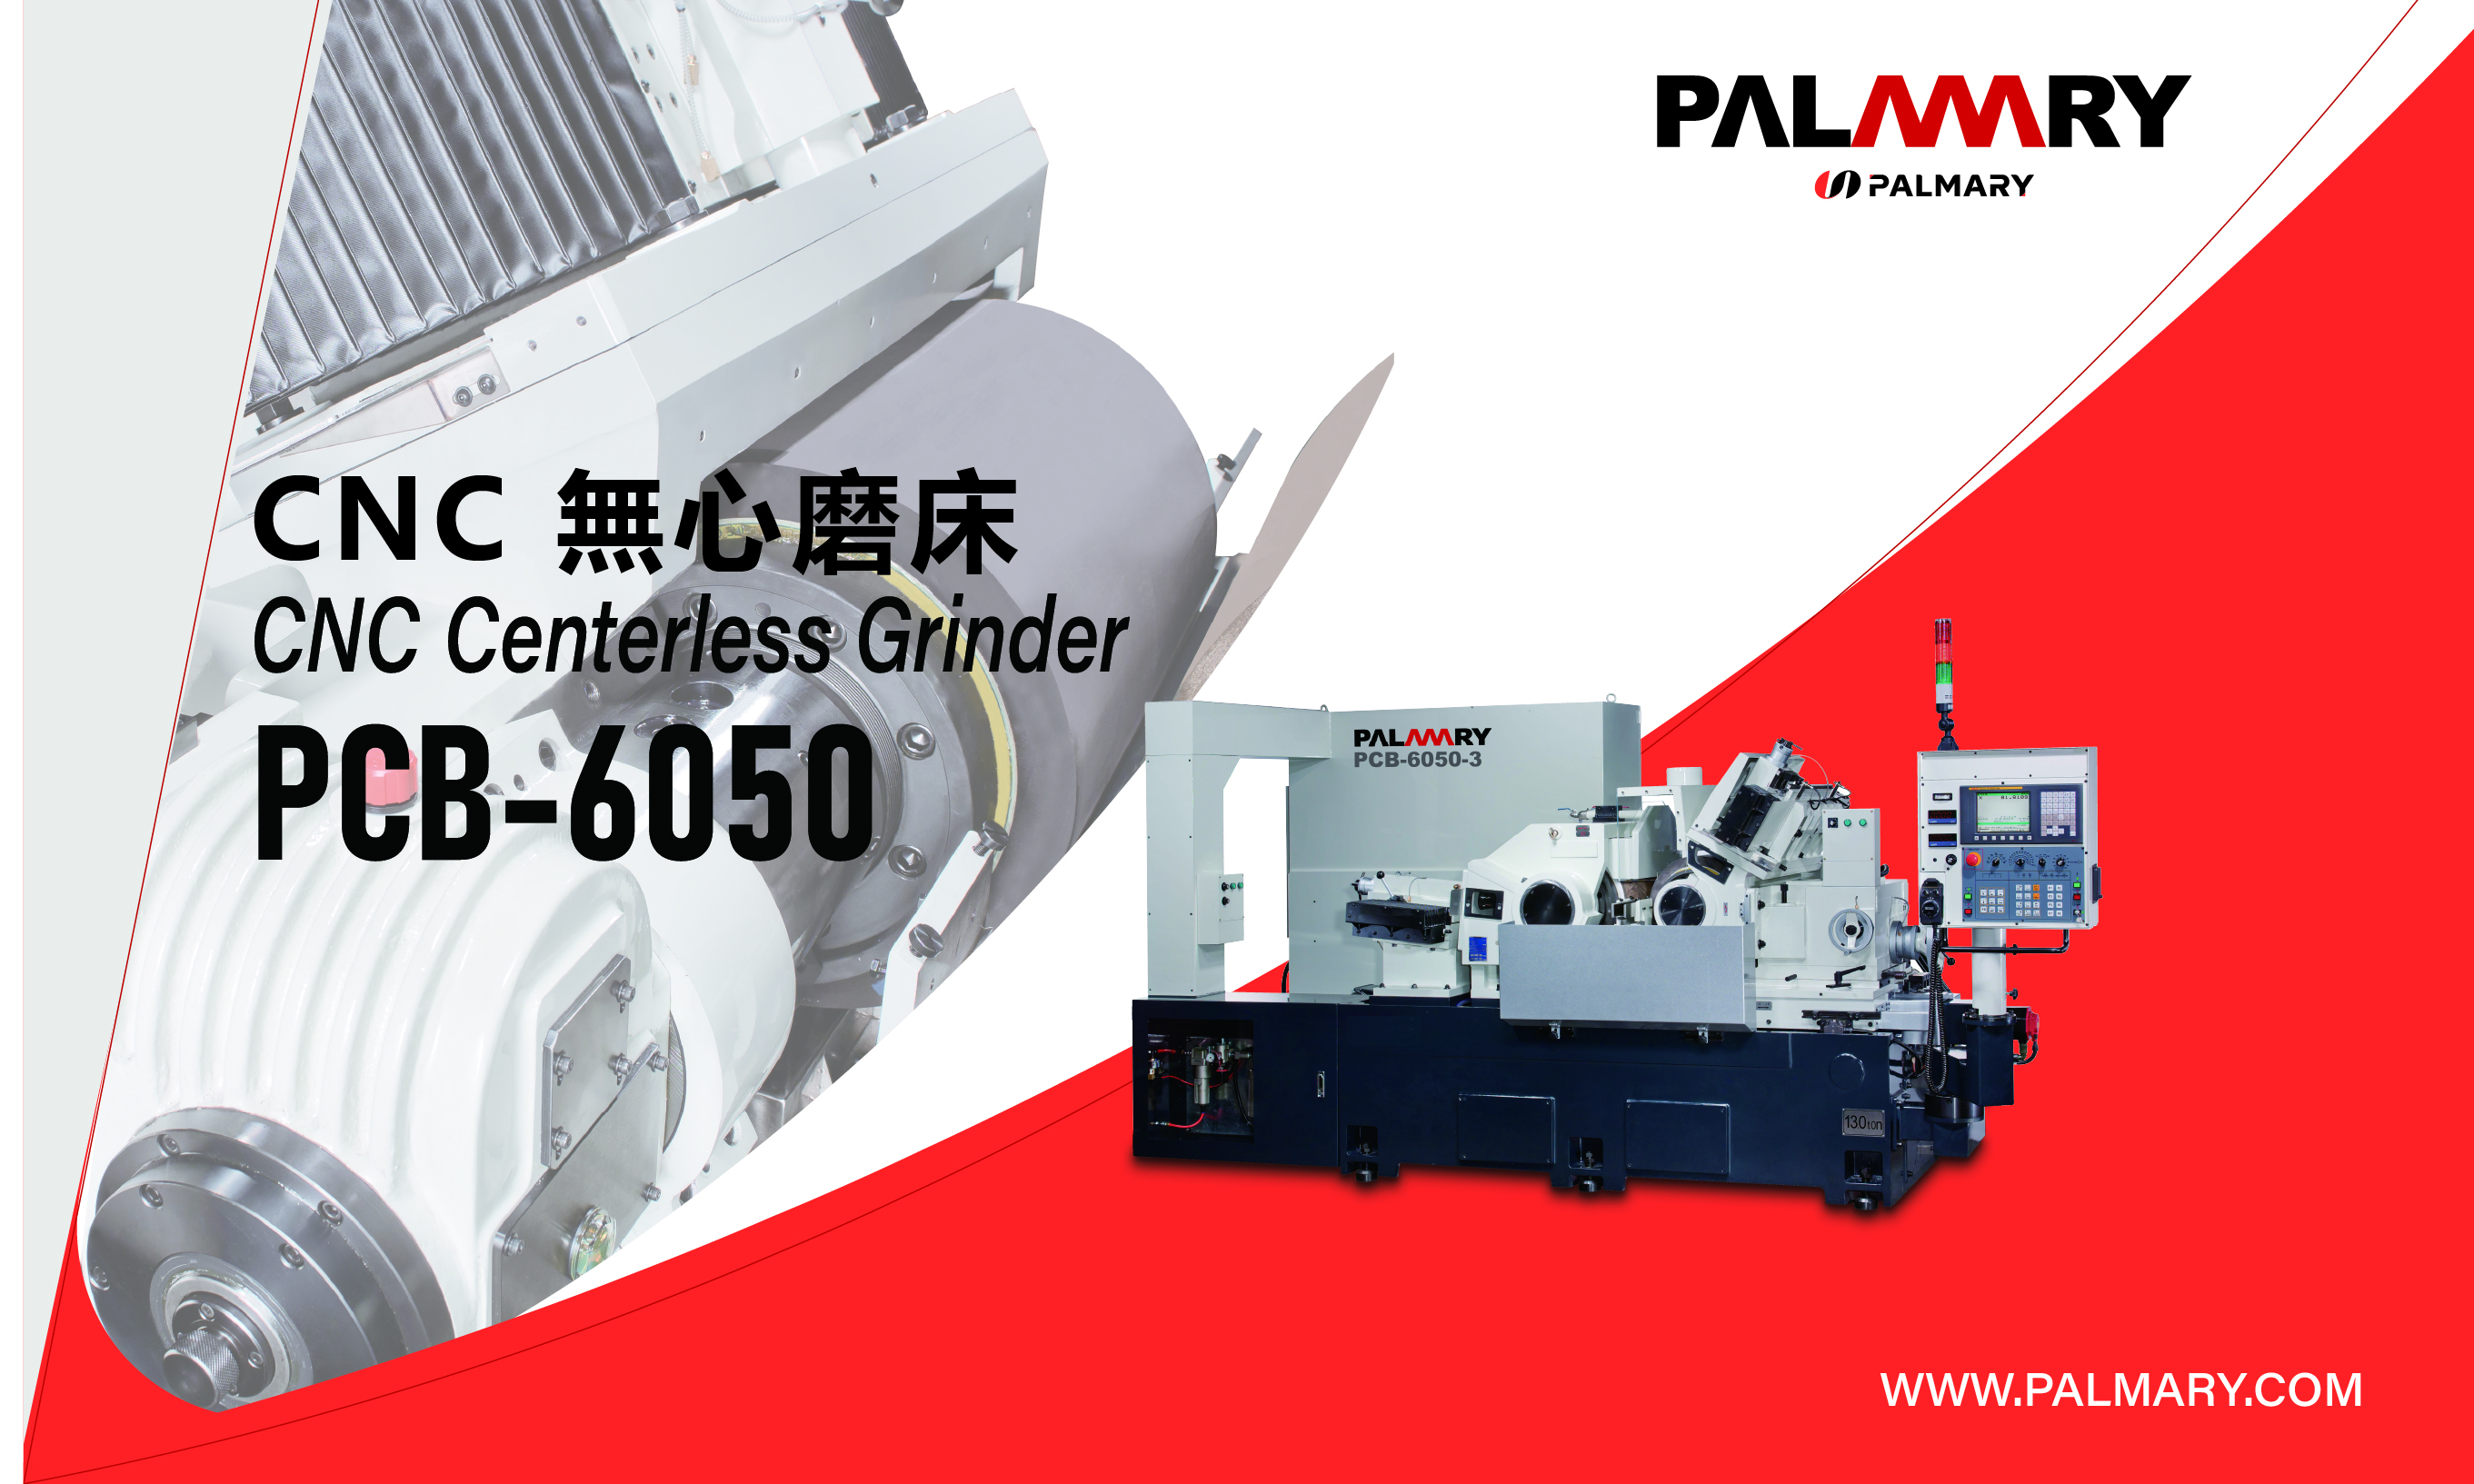 Catalog|PALMARY | CNC Centerless Grinder - Bearing Spindle series